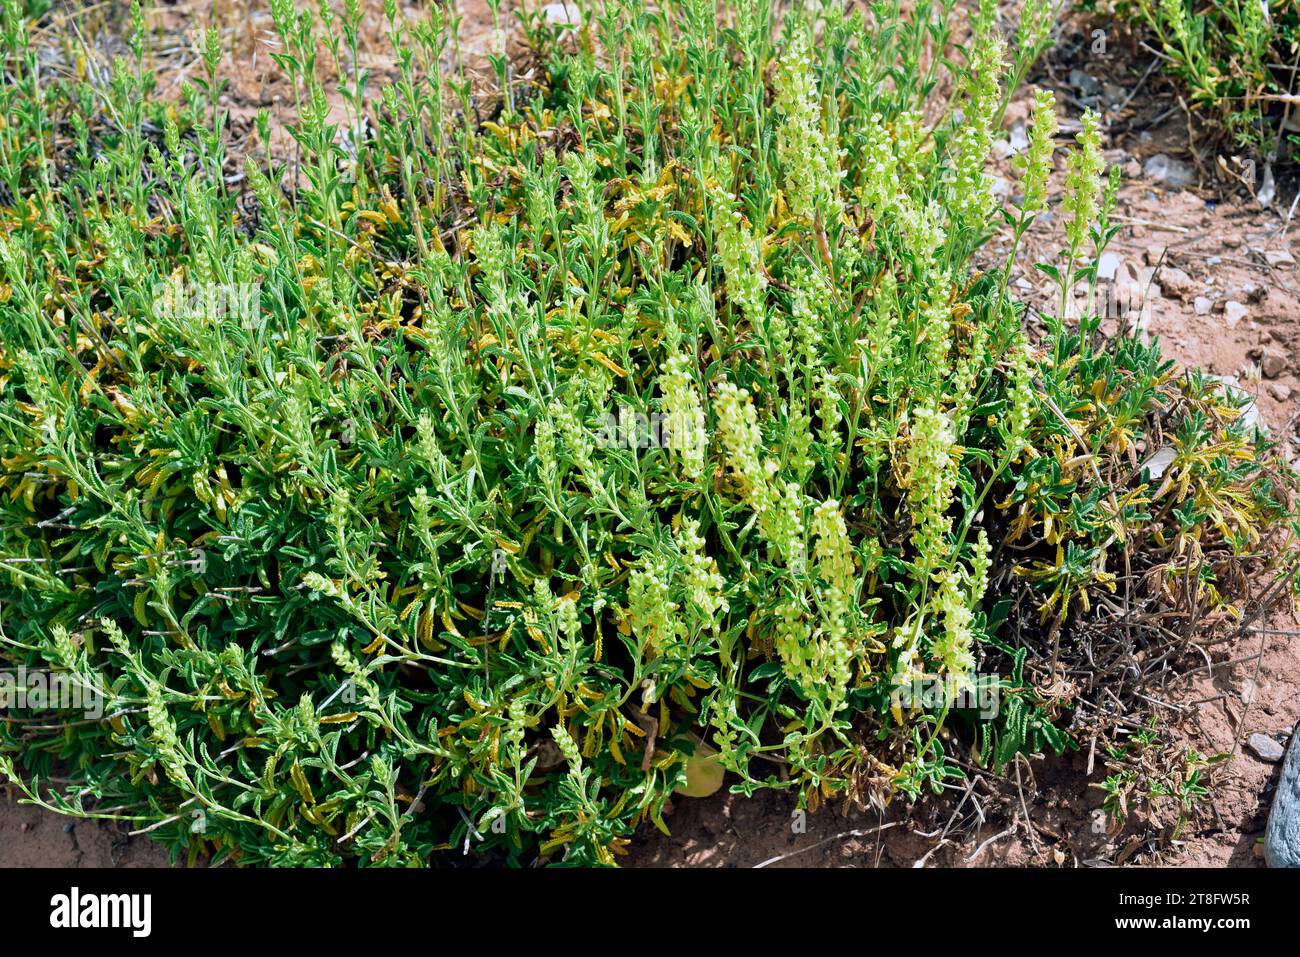 Teucrium oxylepis is a perennial herb native to center and south Spain. This photo was taken in Sierra Nevada, Granada, Andalusia, Spain. Stock Photo